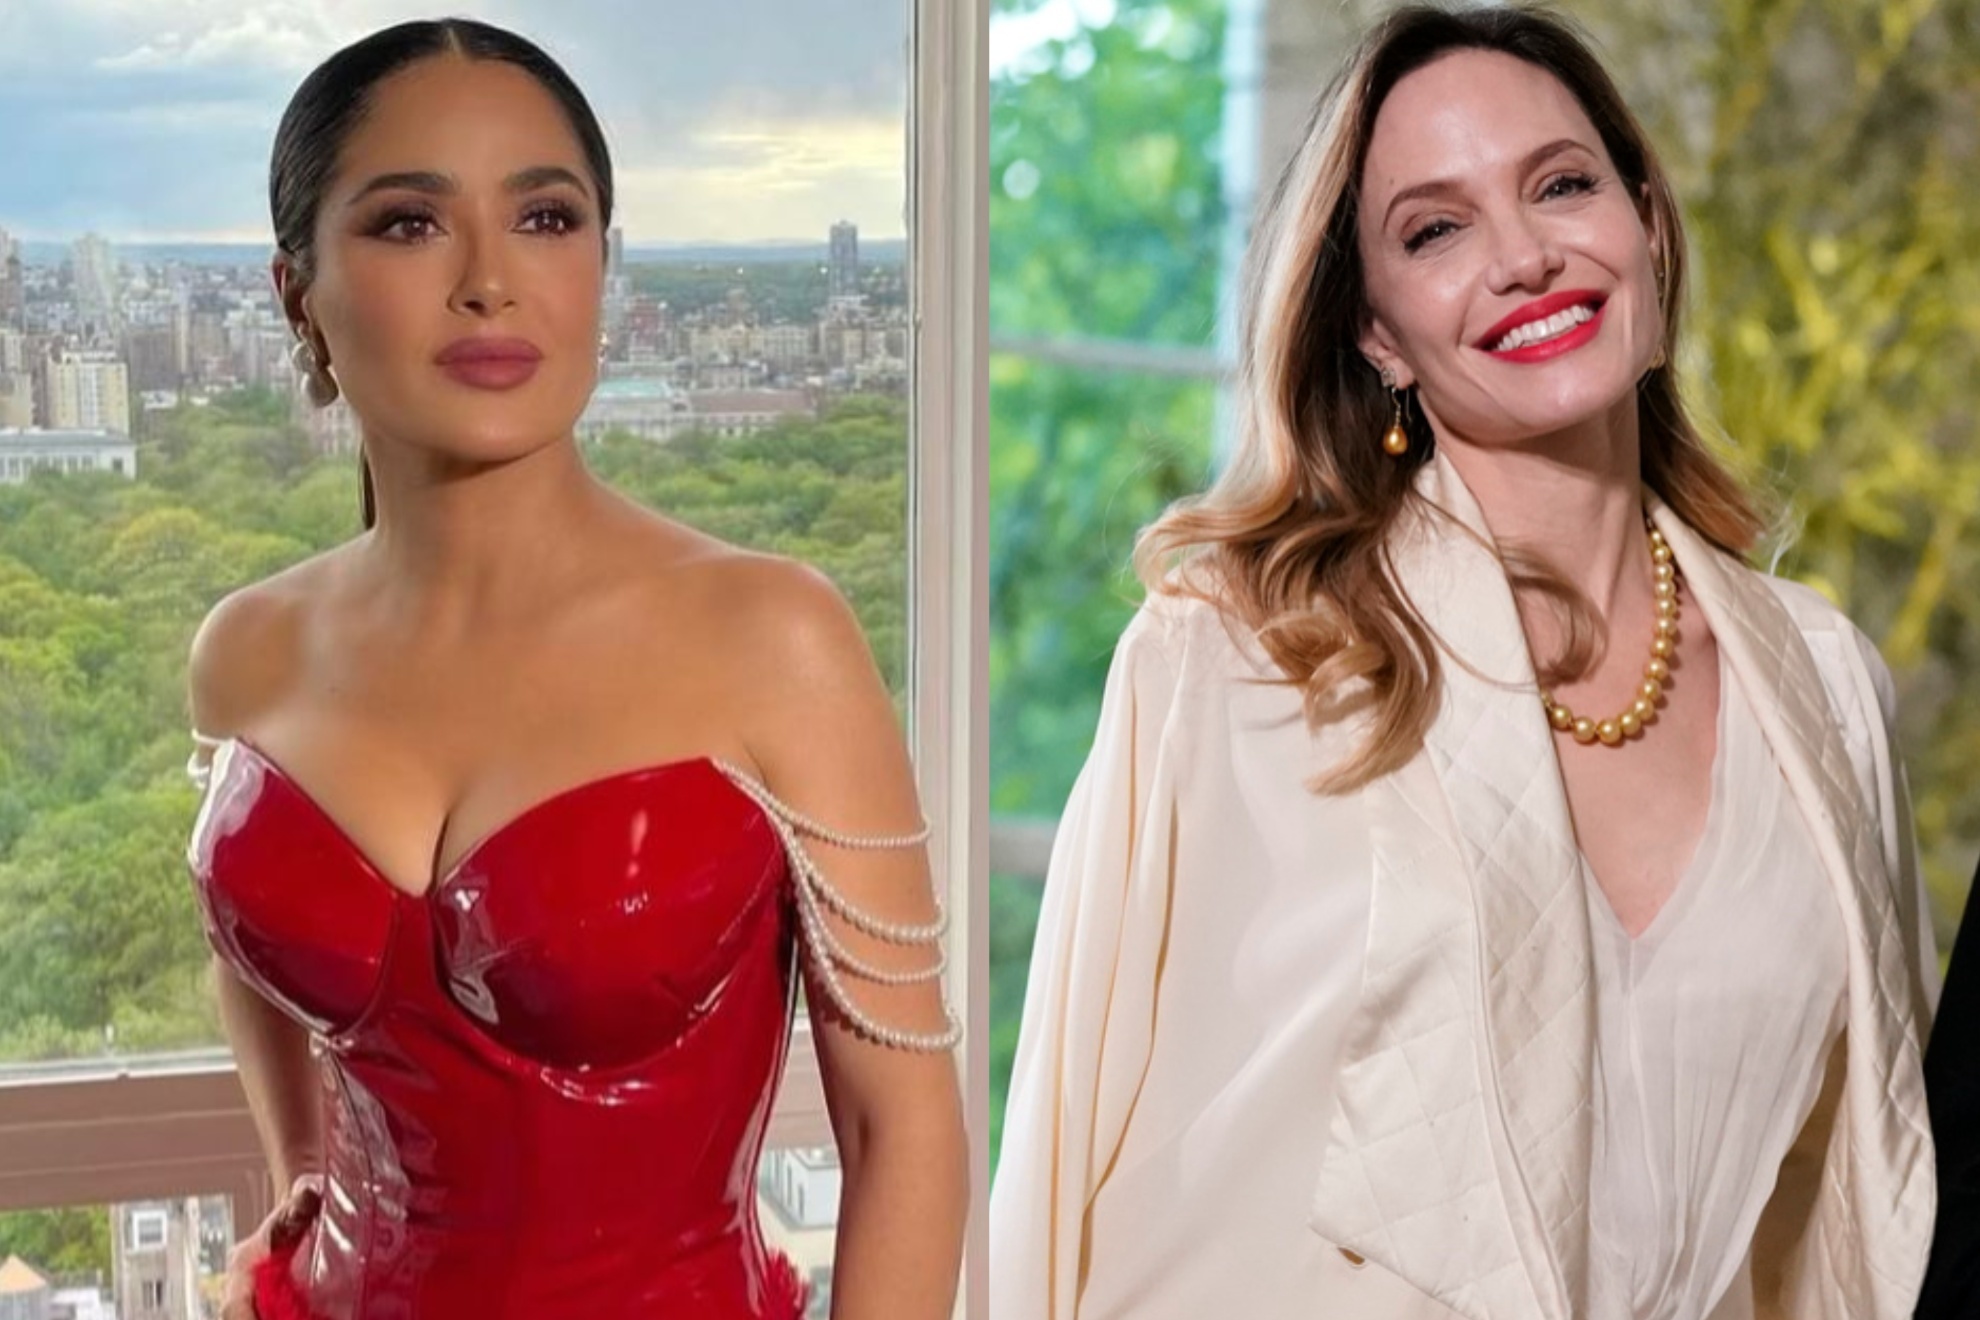 Salma Hayek and Angelina Jolie have been very good friends for a long time